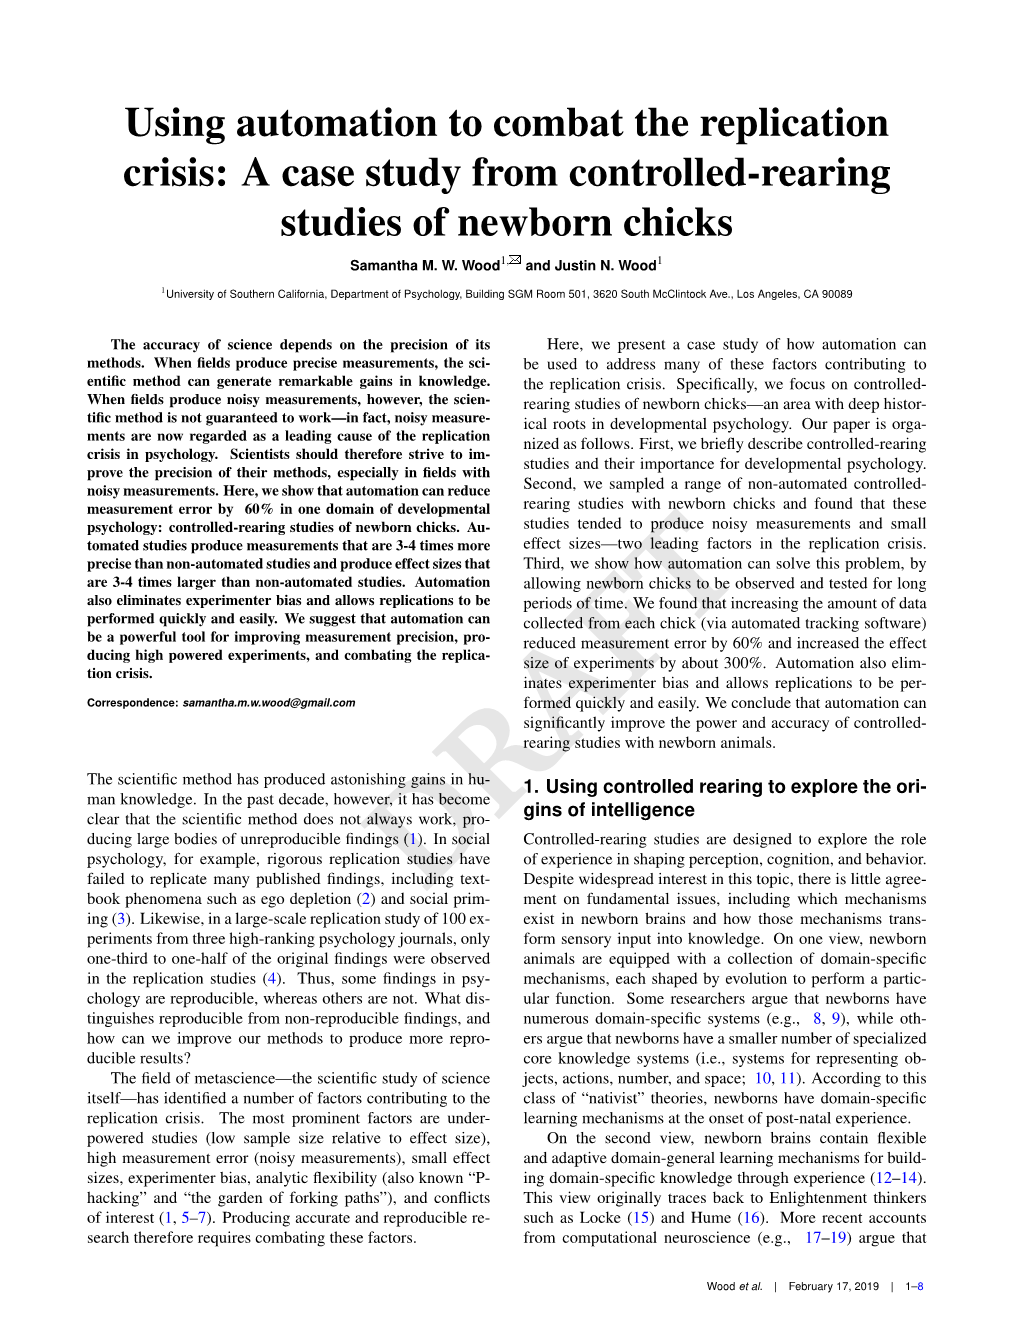 A Case Study from Controlled-Rearing Studies of Newborn Chicks Samantha M